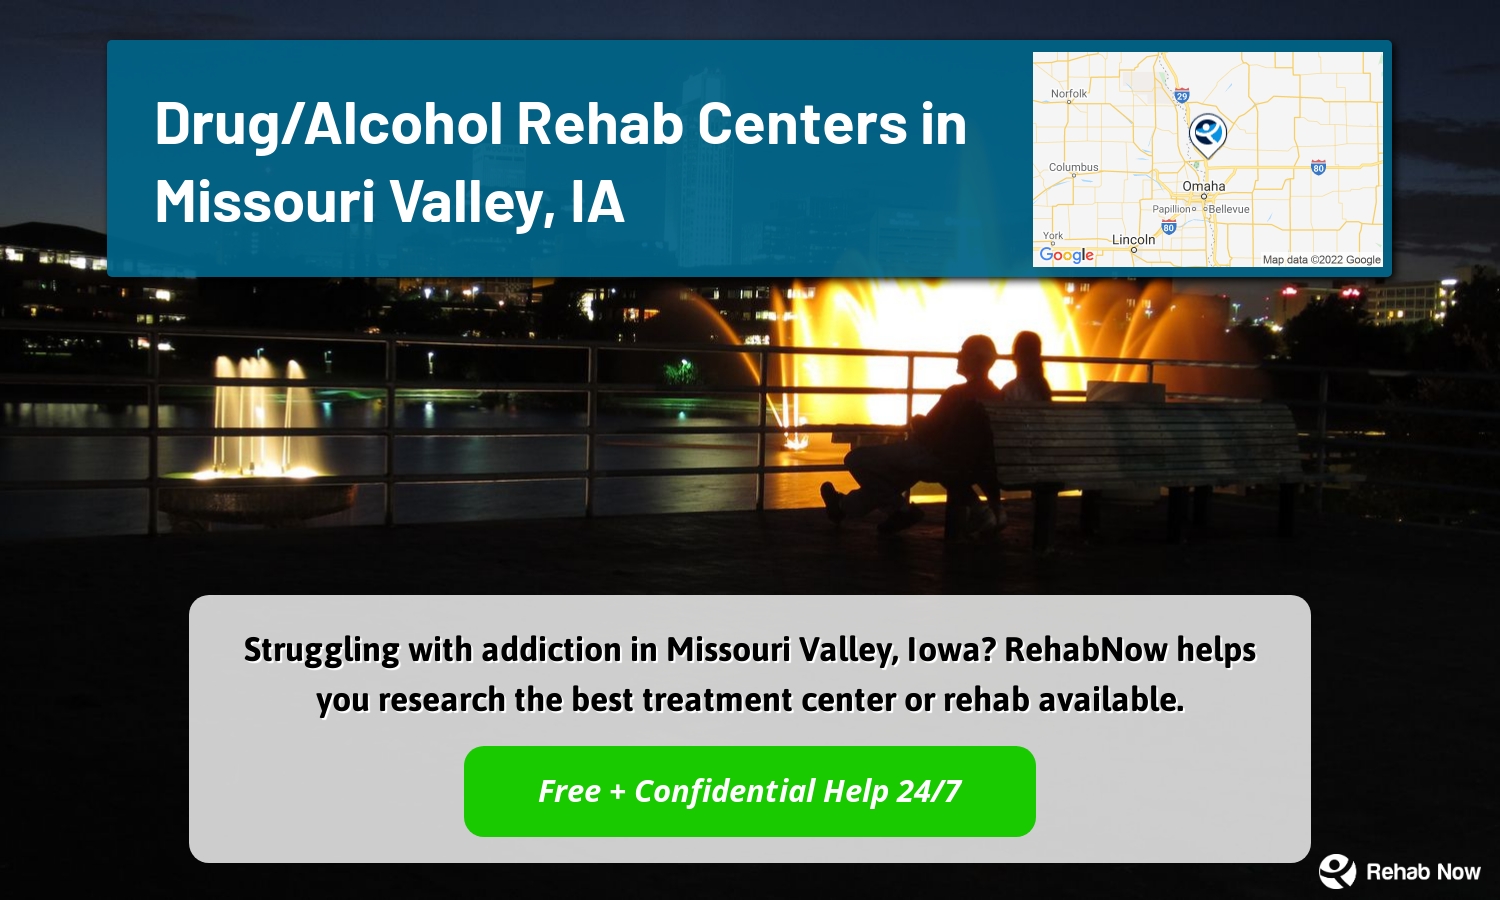 Struggling with addiction in Missouri Valley, Iowa? RehabNow helps you research the best treatment center or rehab available.